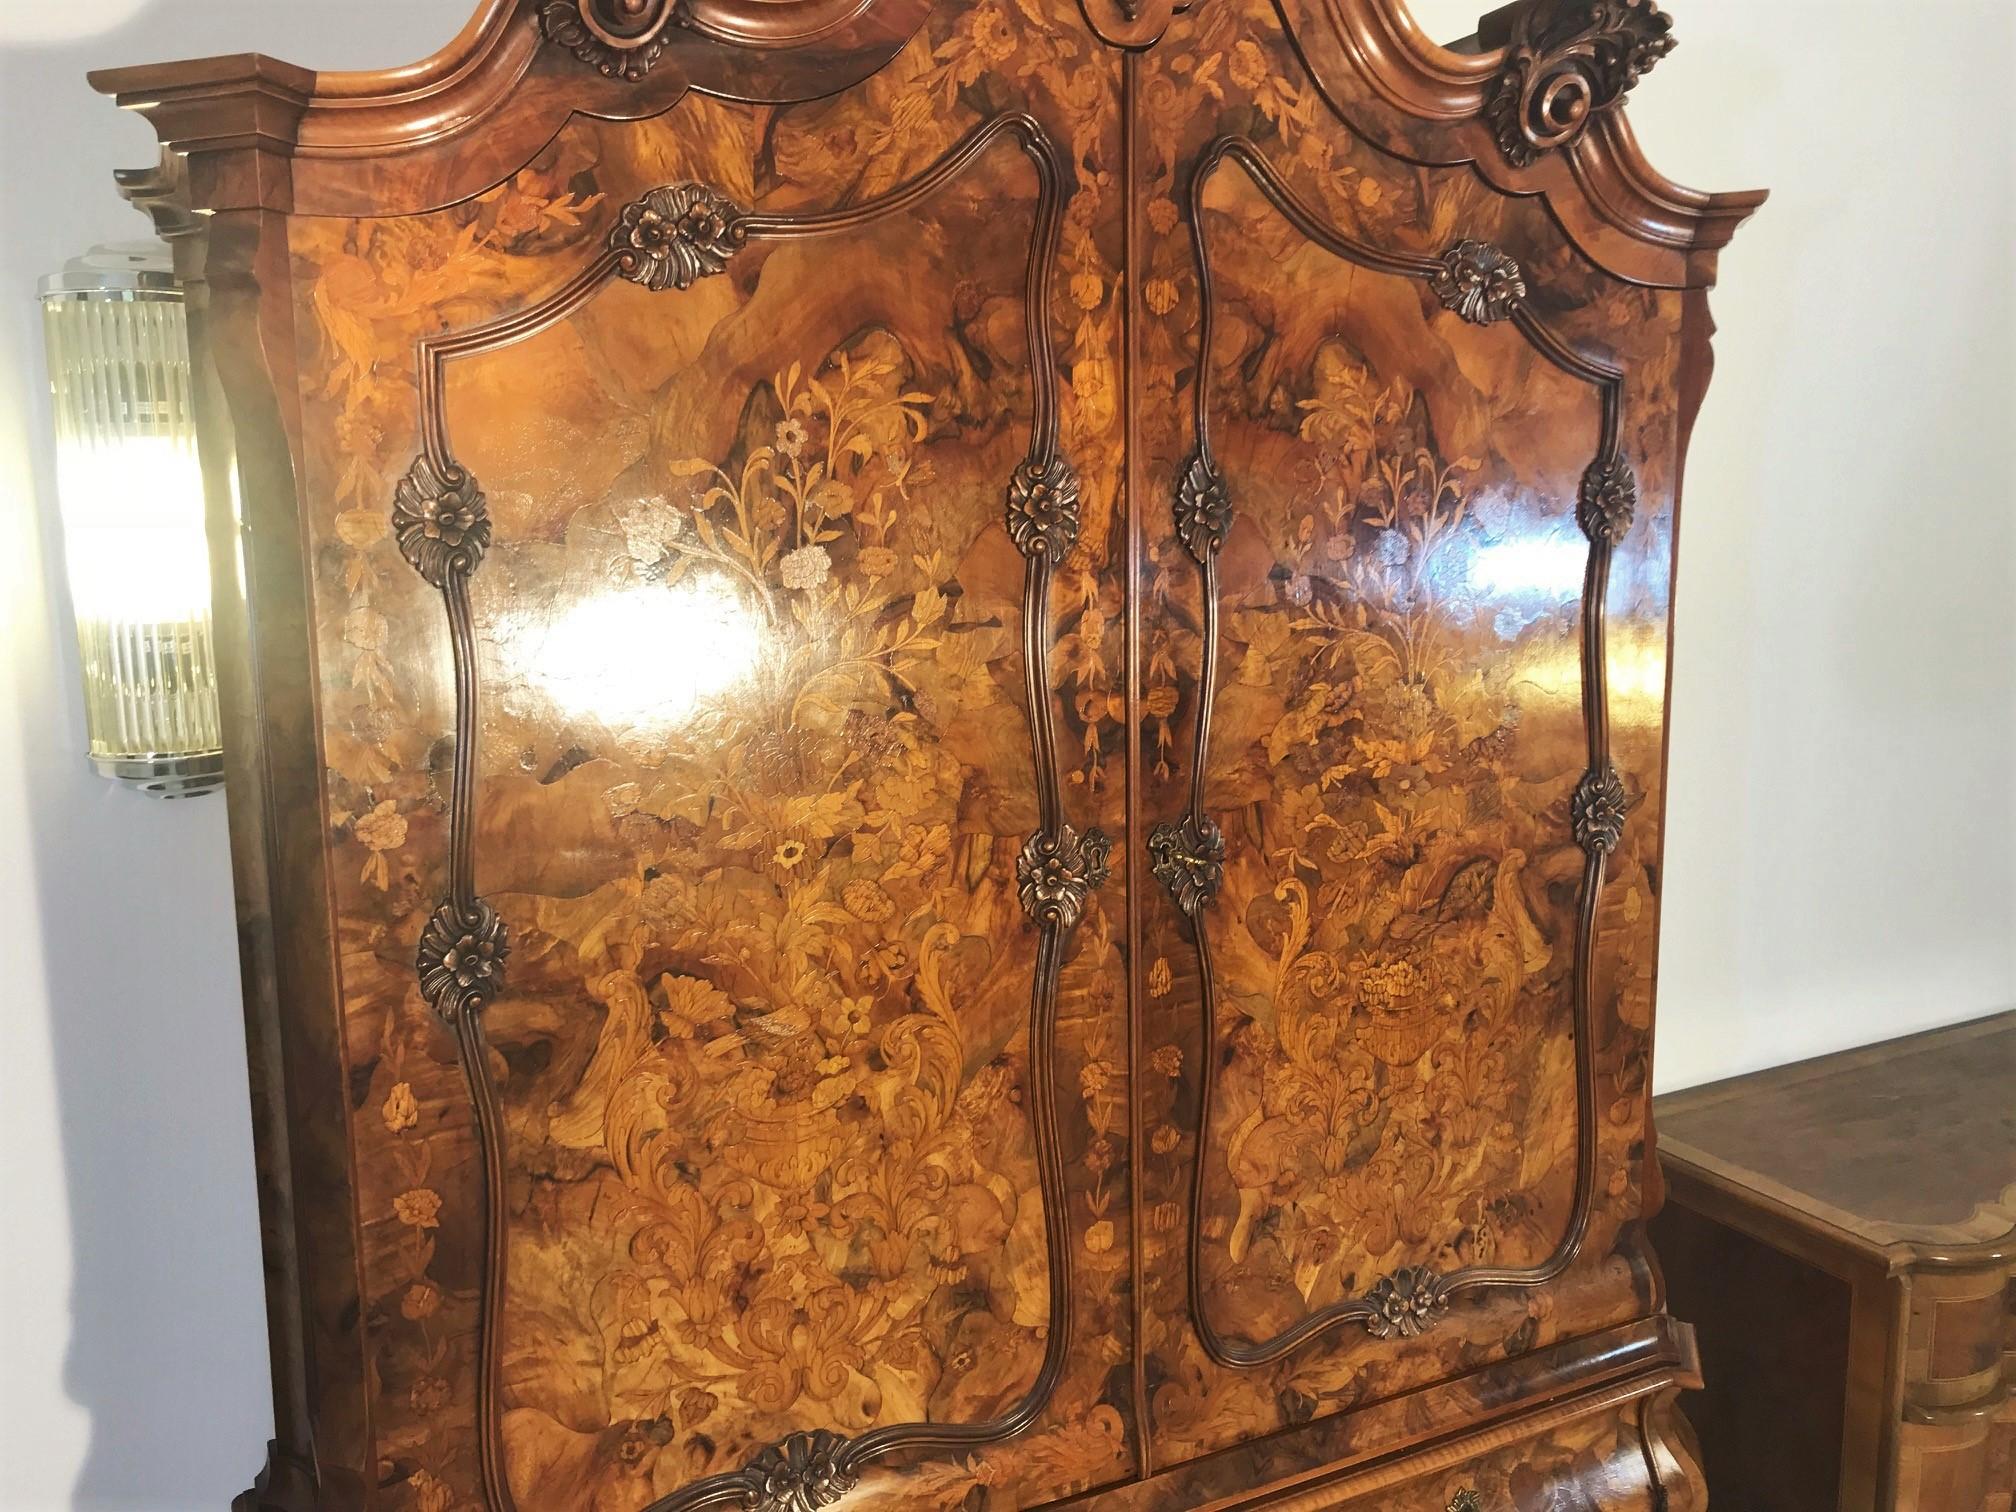 Walnut armoire or living room cabinet with beautiful floral ornamentations on the doors as well as curved drawers. Features an elegant crown with finely crafted details and matching claw feets. This unique masterpiece was build in the 1970s in